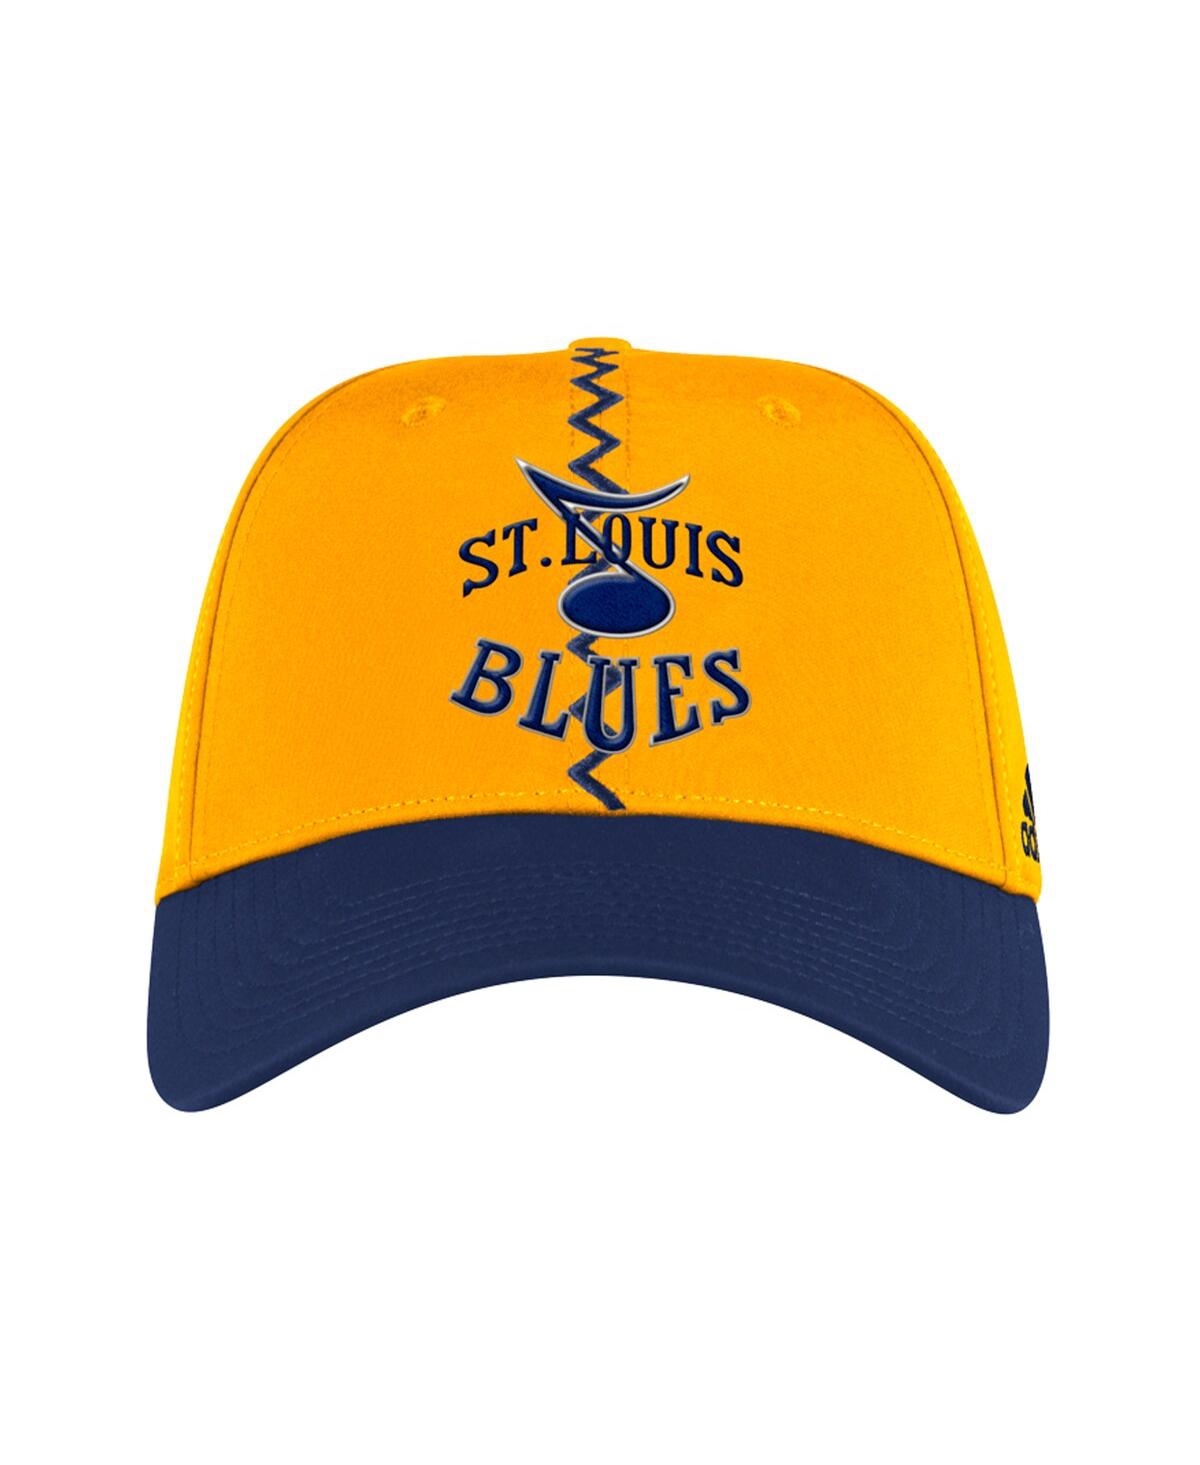 Men's Fanatics Branded Yellow St. Louis Blues Special Edition 2.0